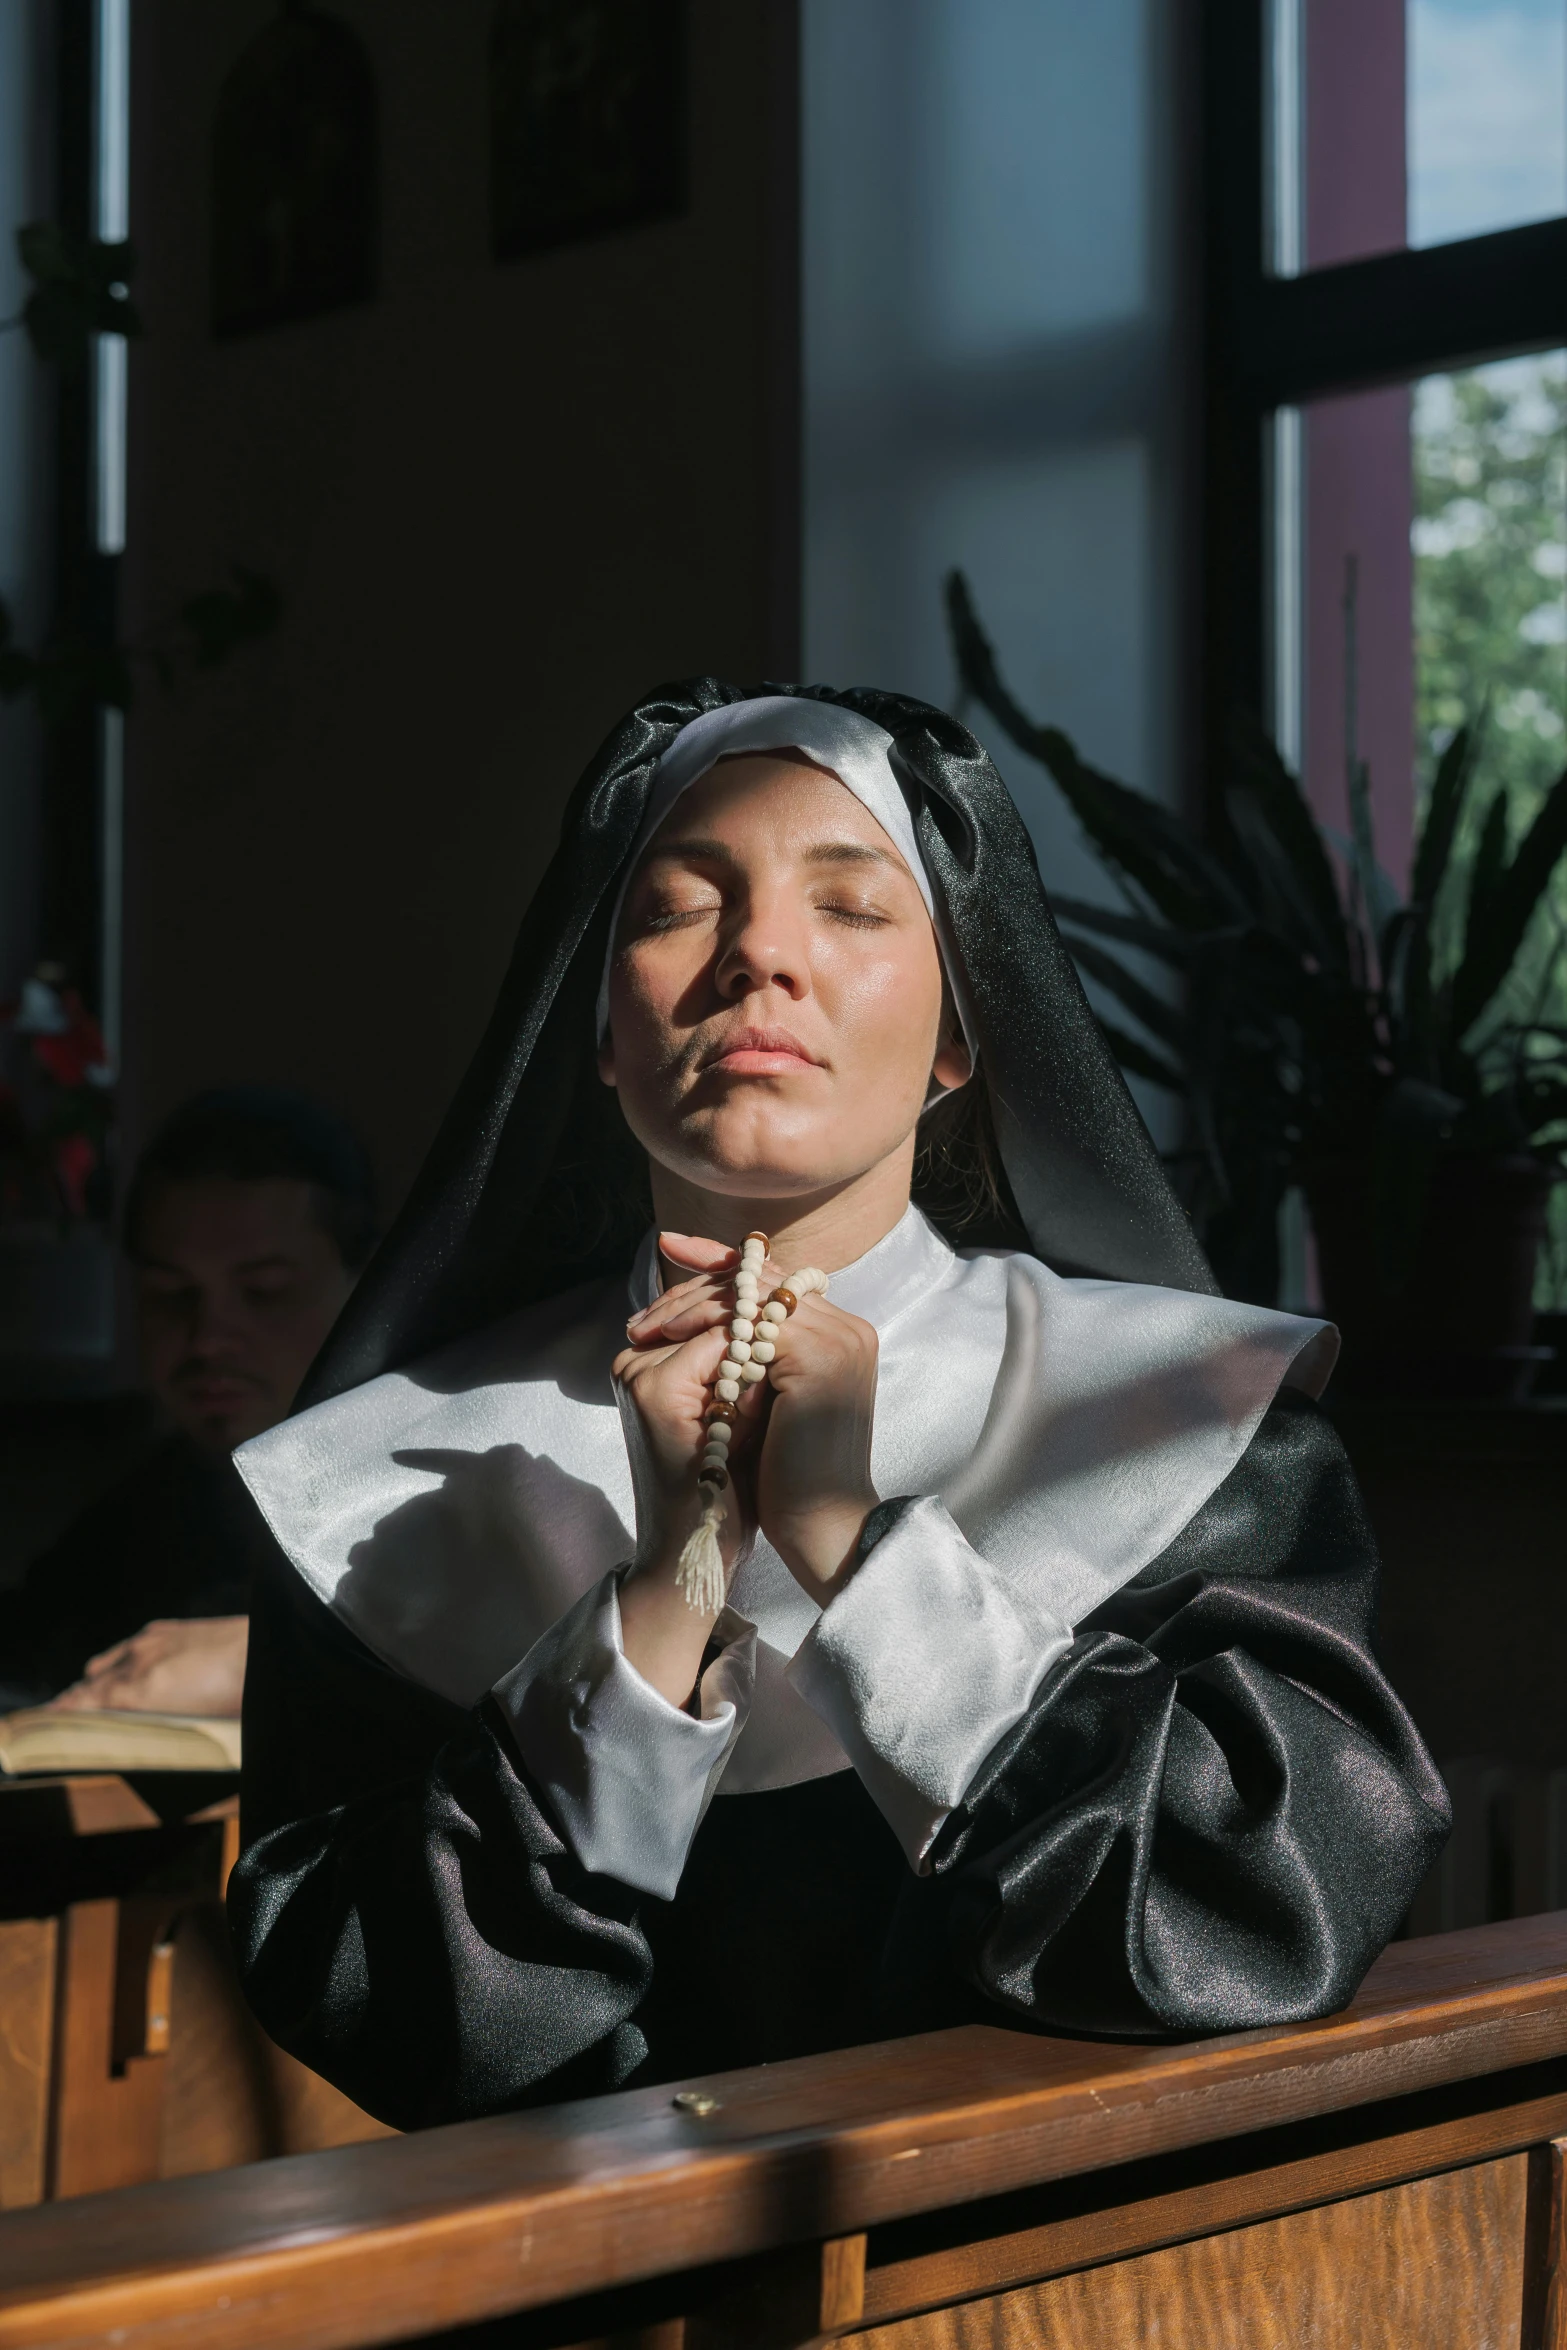 an image of a woman that is wearing nun clothing